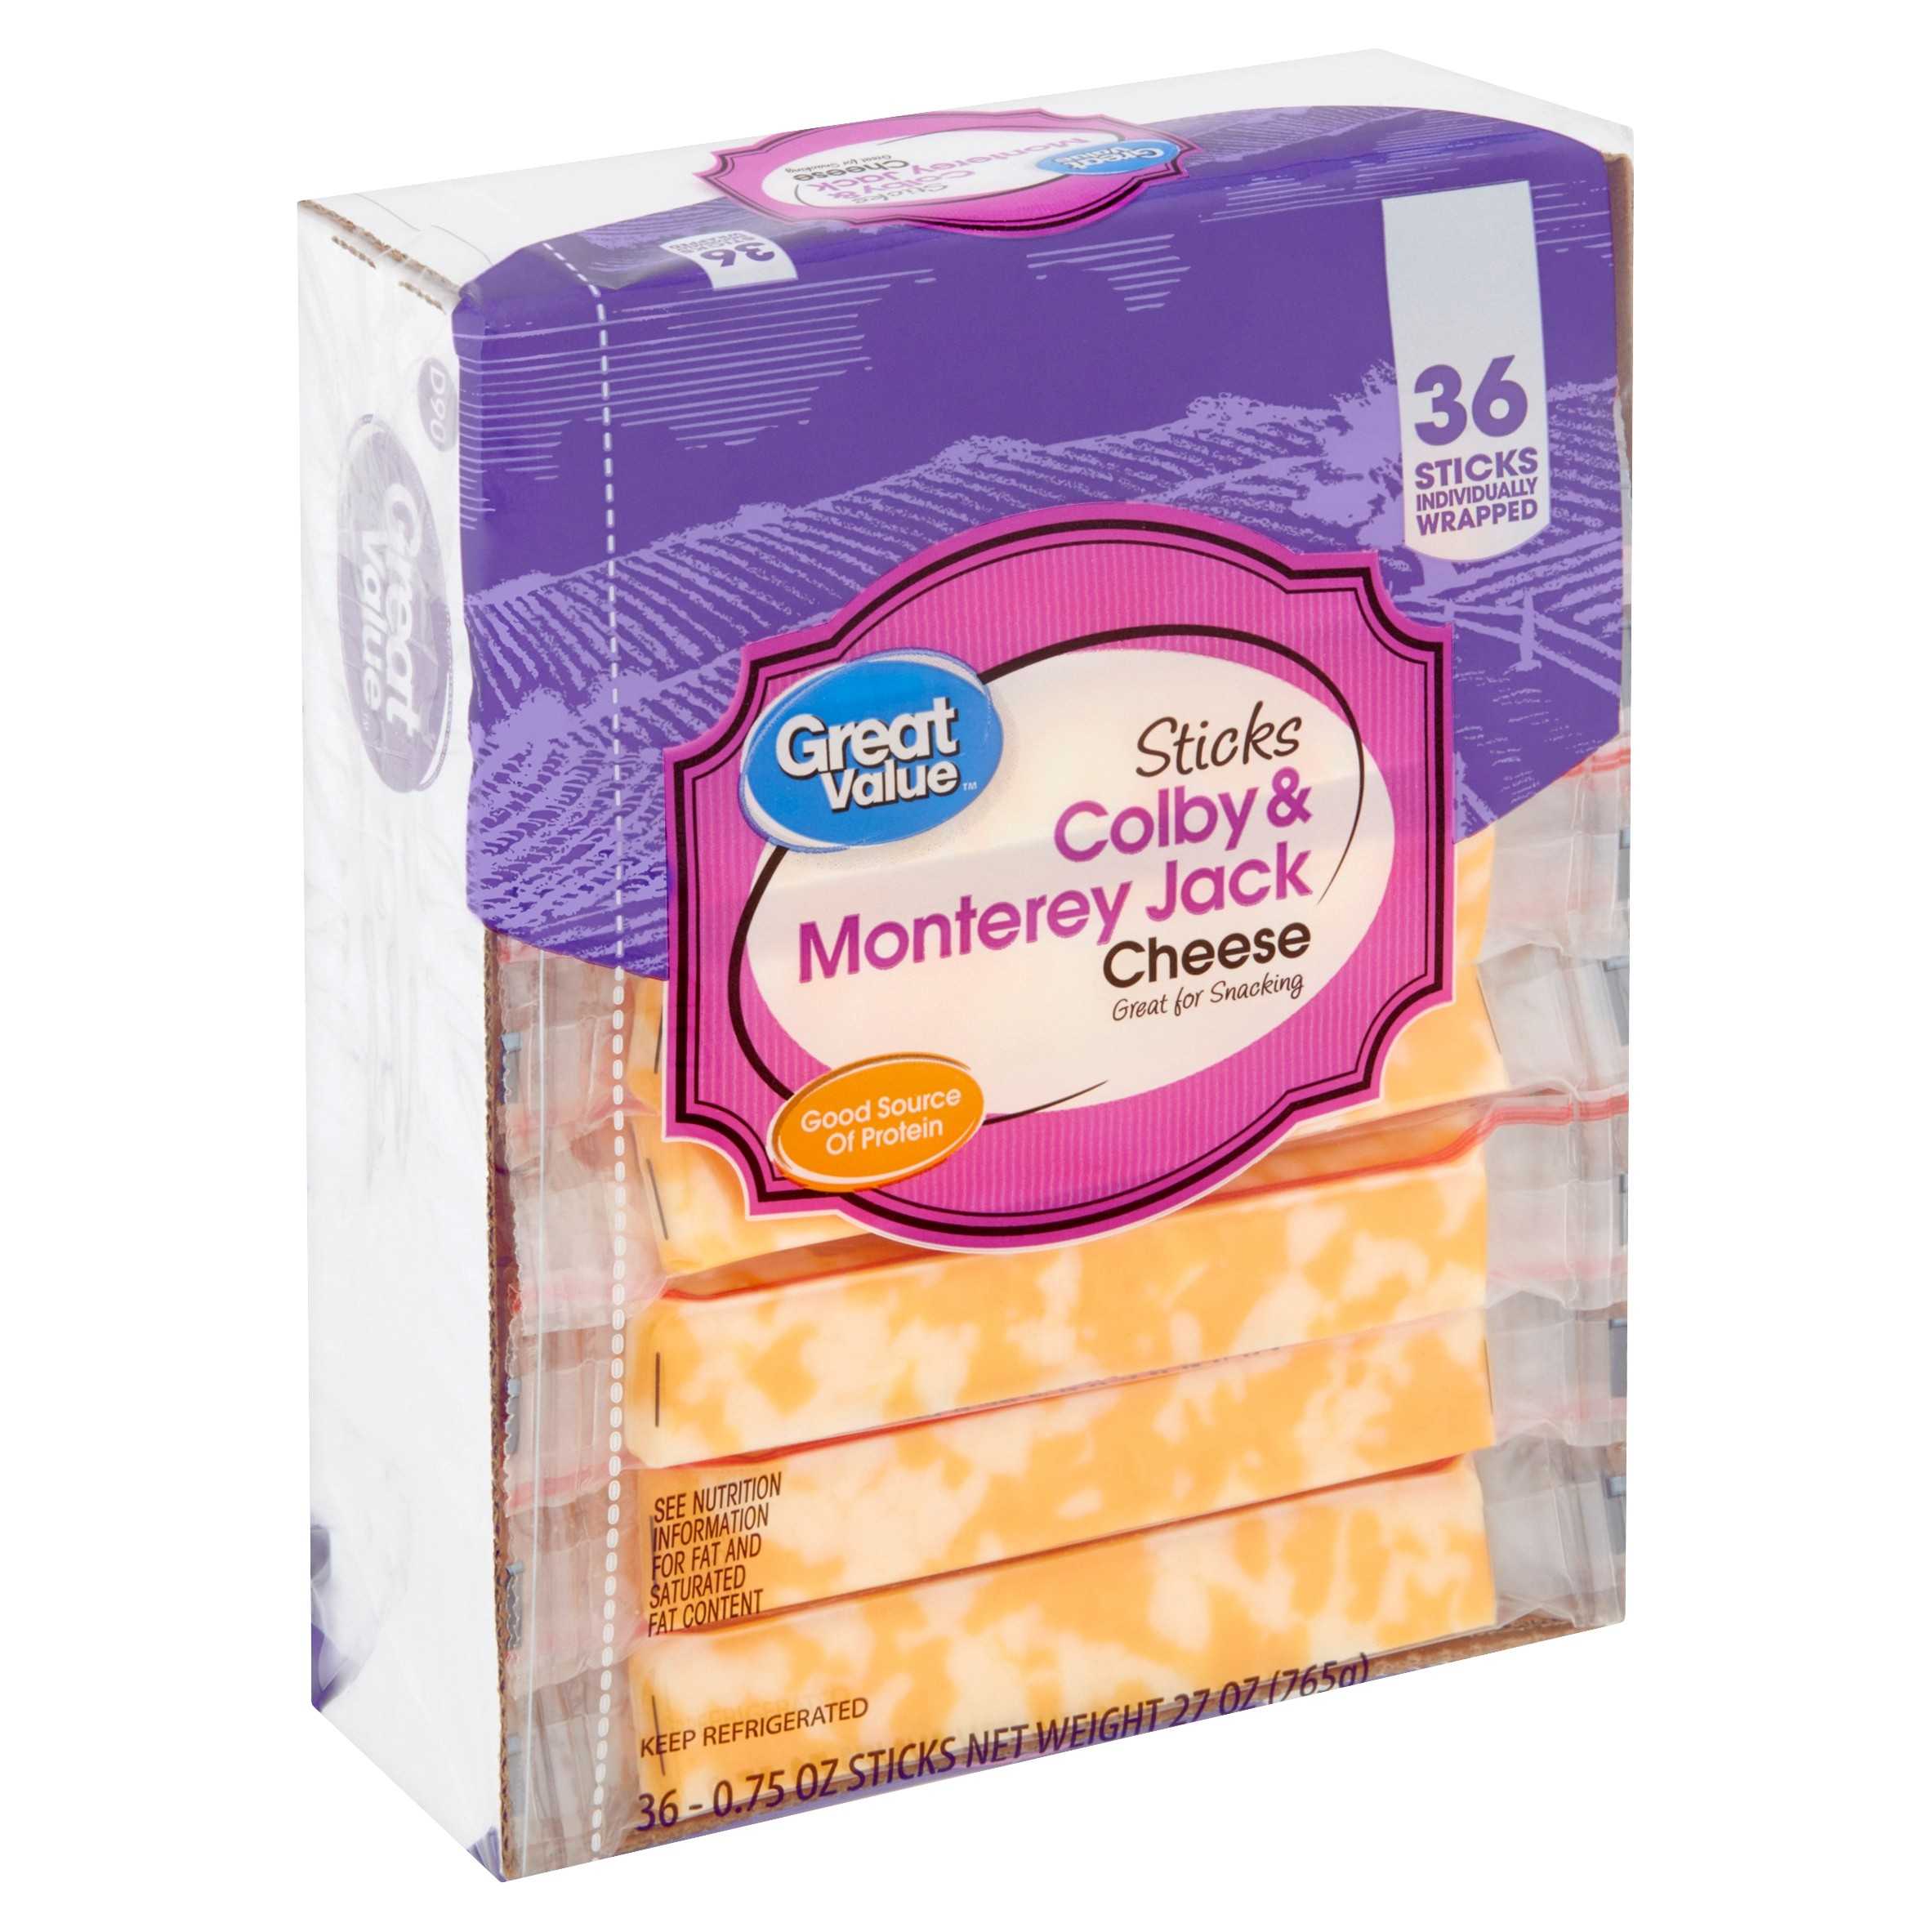 Great Value Sticks Colby & Monterey Jack Cheese, 0.75 oz, 36 count